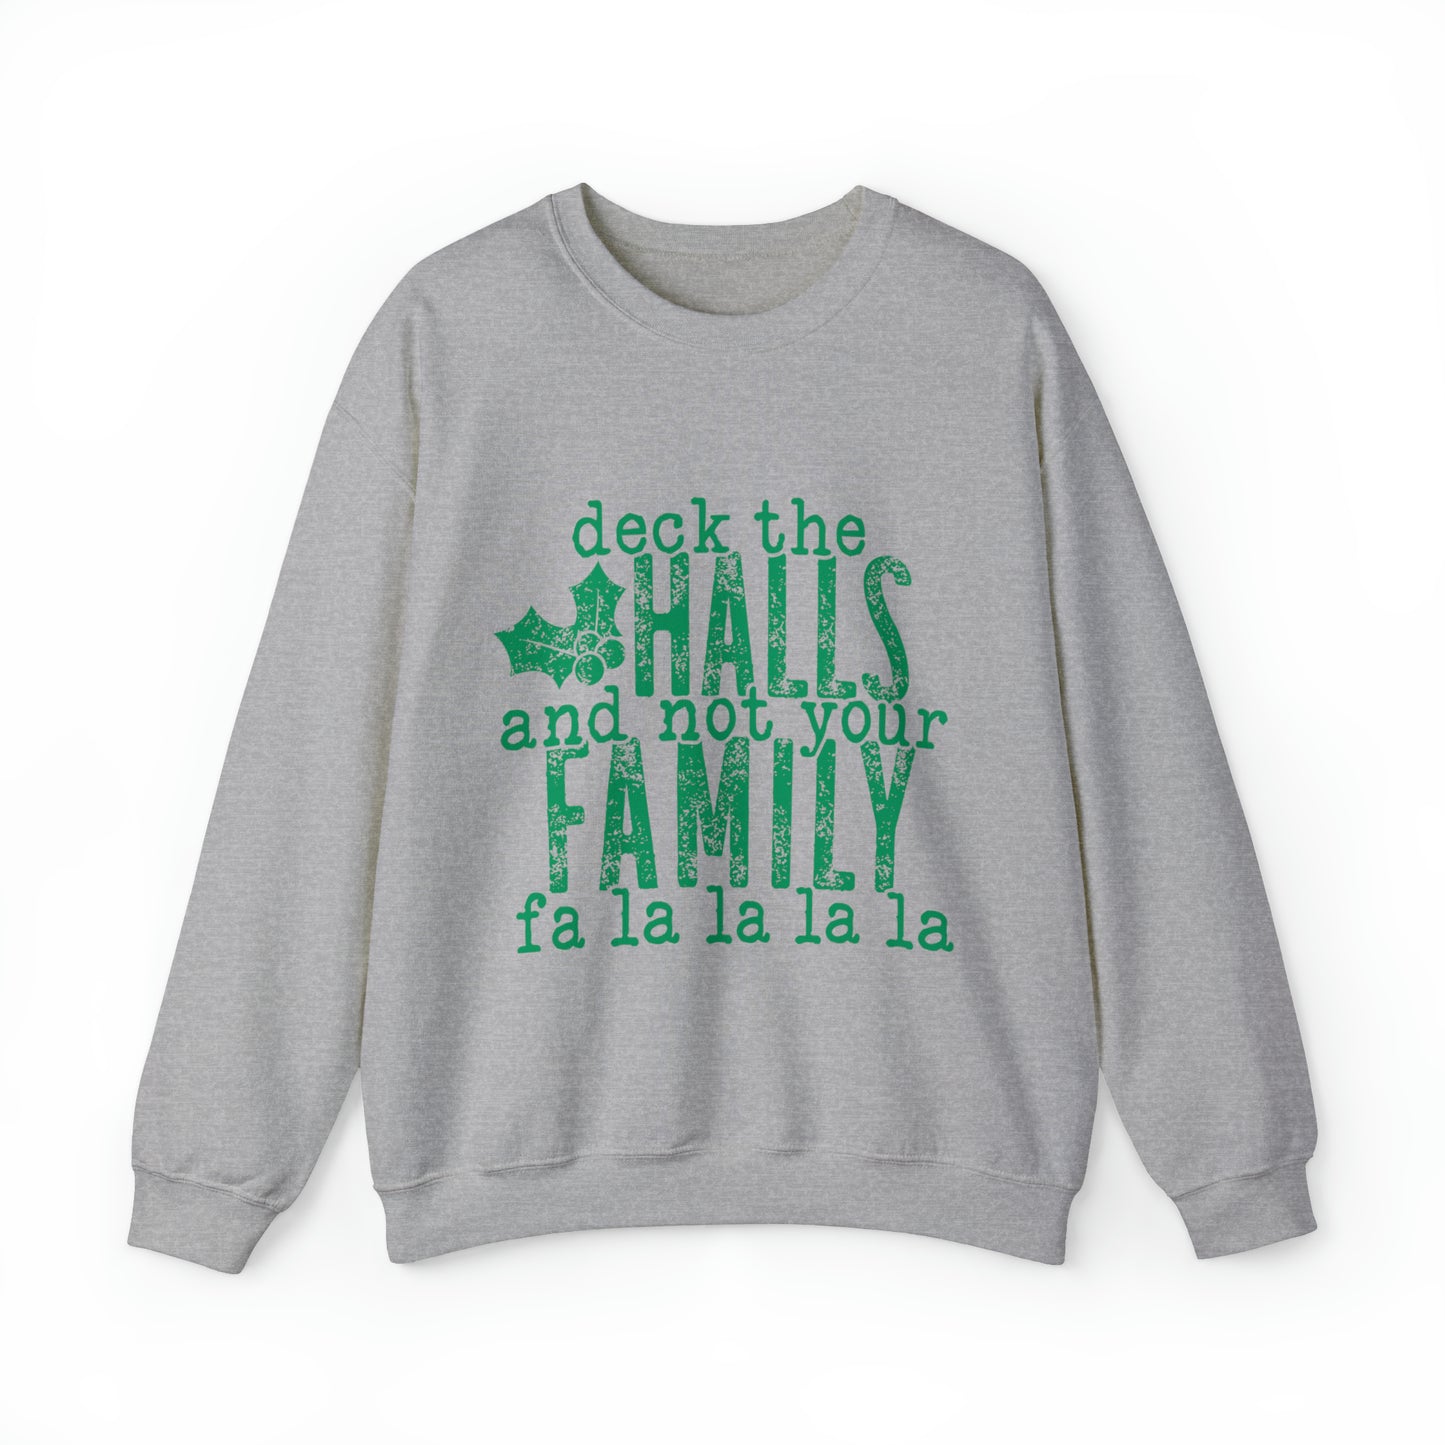 Deck the Halls Family Unisex Adult Funny Christmas Shirt with Green